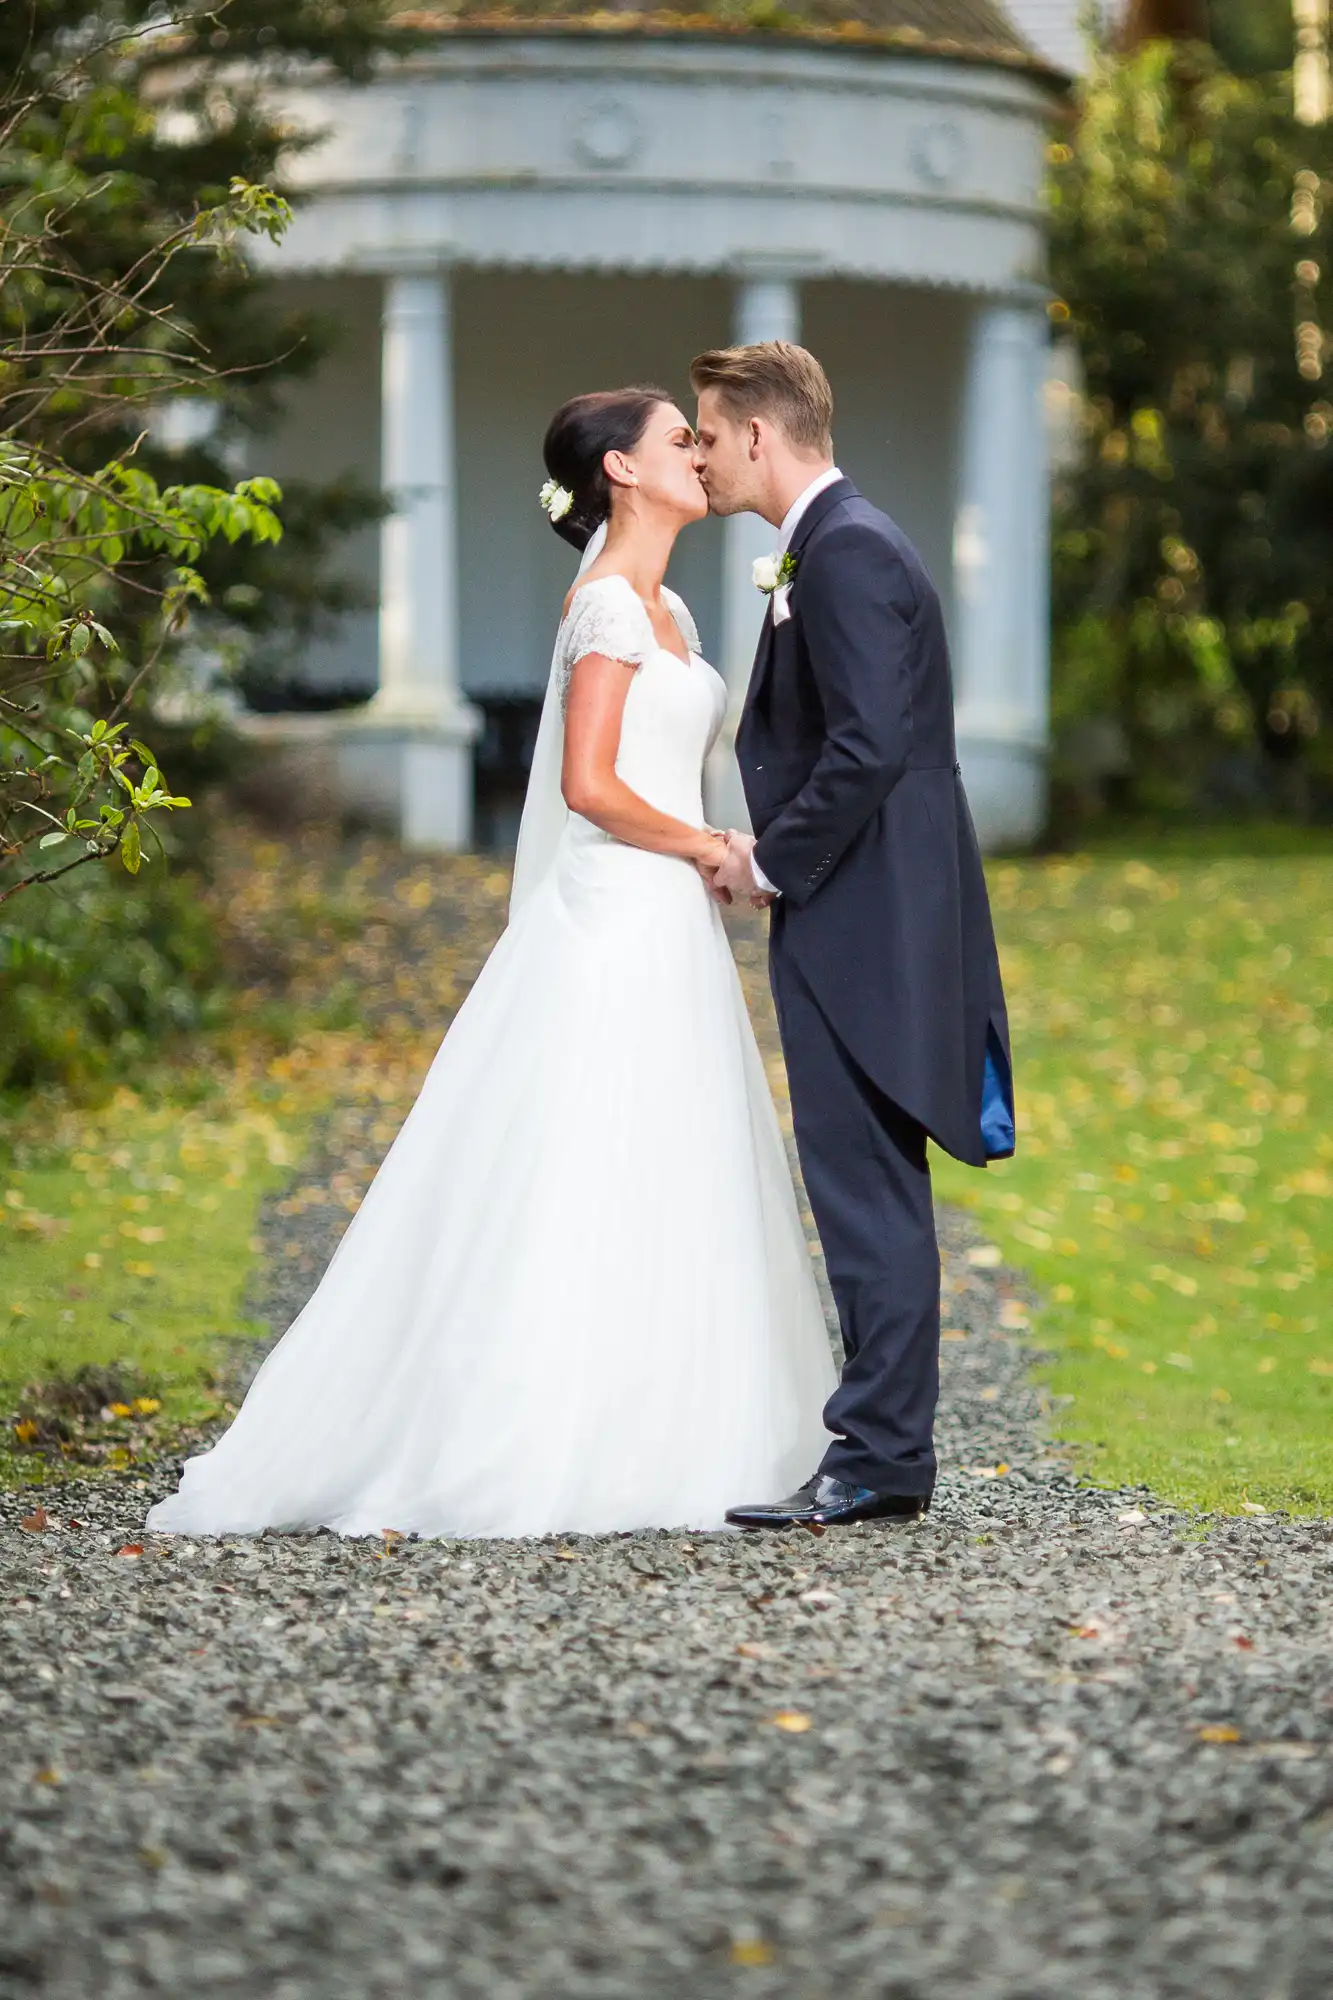 A bride and groom kissing outdoors, with the bride in a white dress and the groom in a navy suit, standing in front of a white gazebo surrounded by trees.